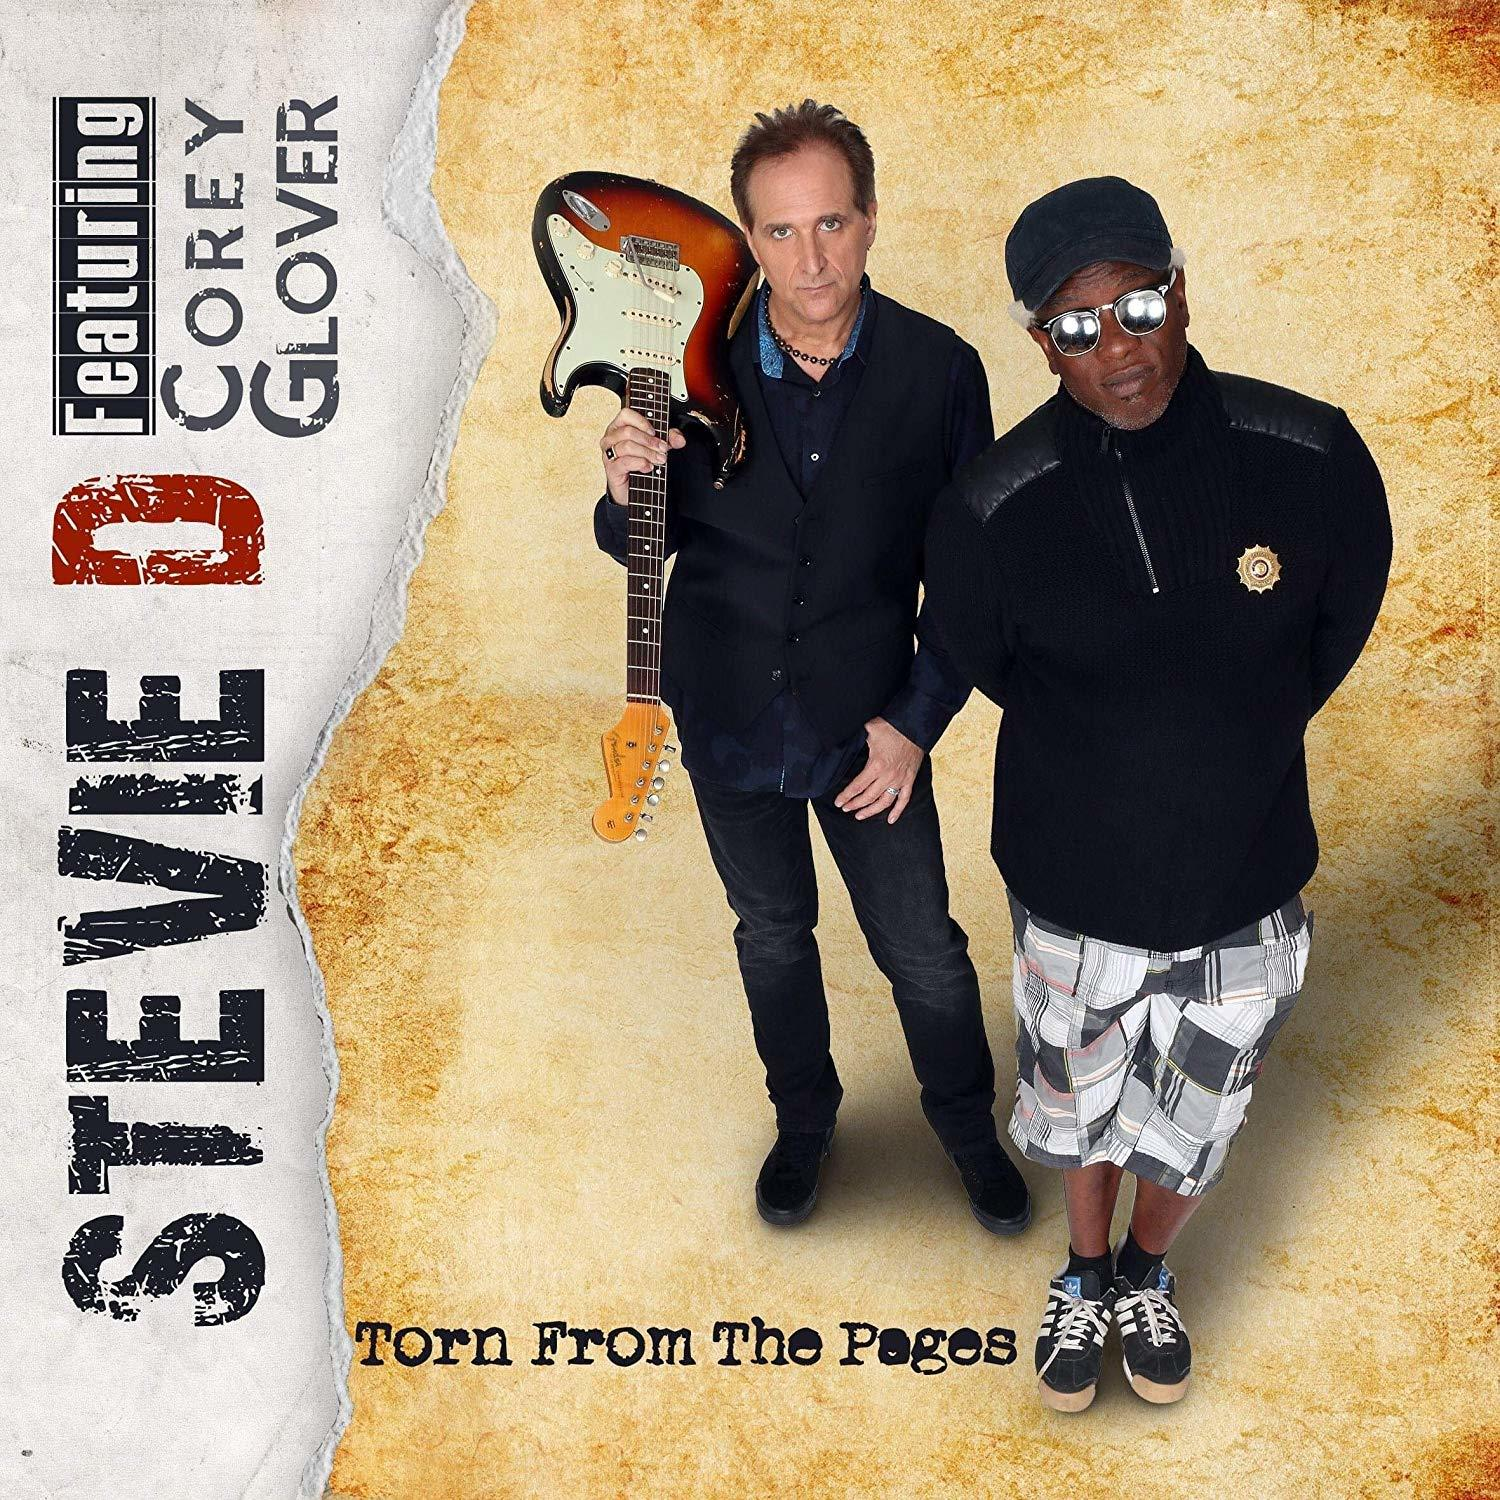 Stevie D, From - - Cory The Pages Glover Torn (CD)